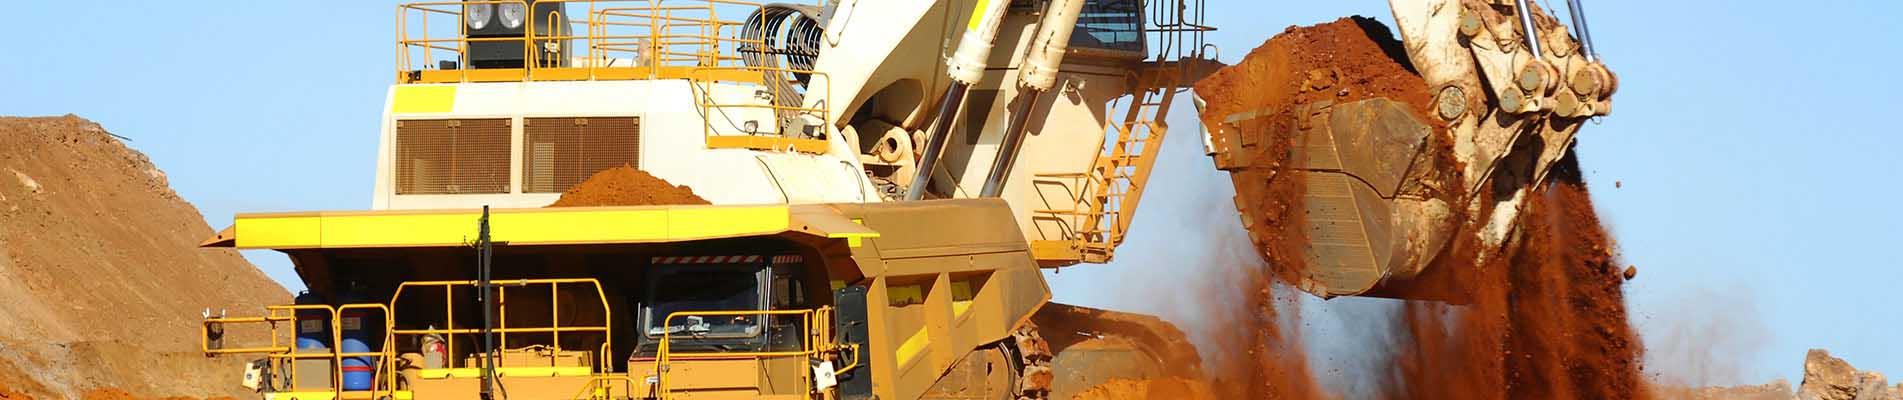 Coatings to increase lifetime of construction machines